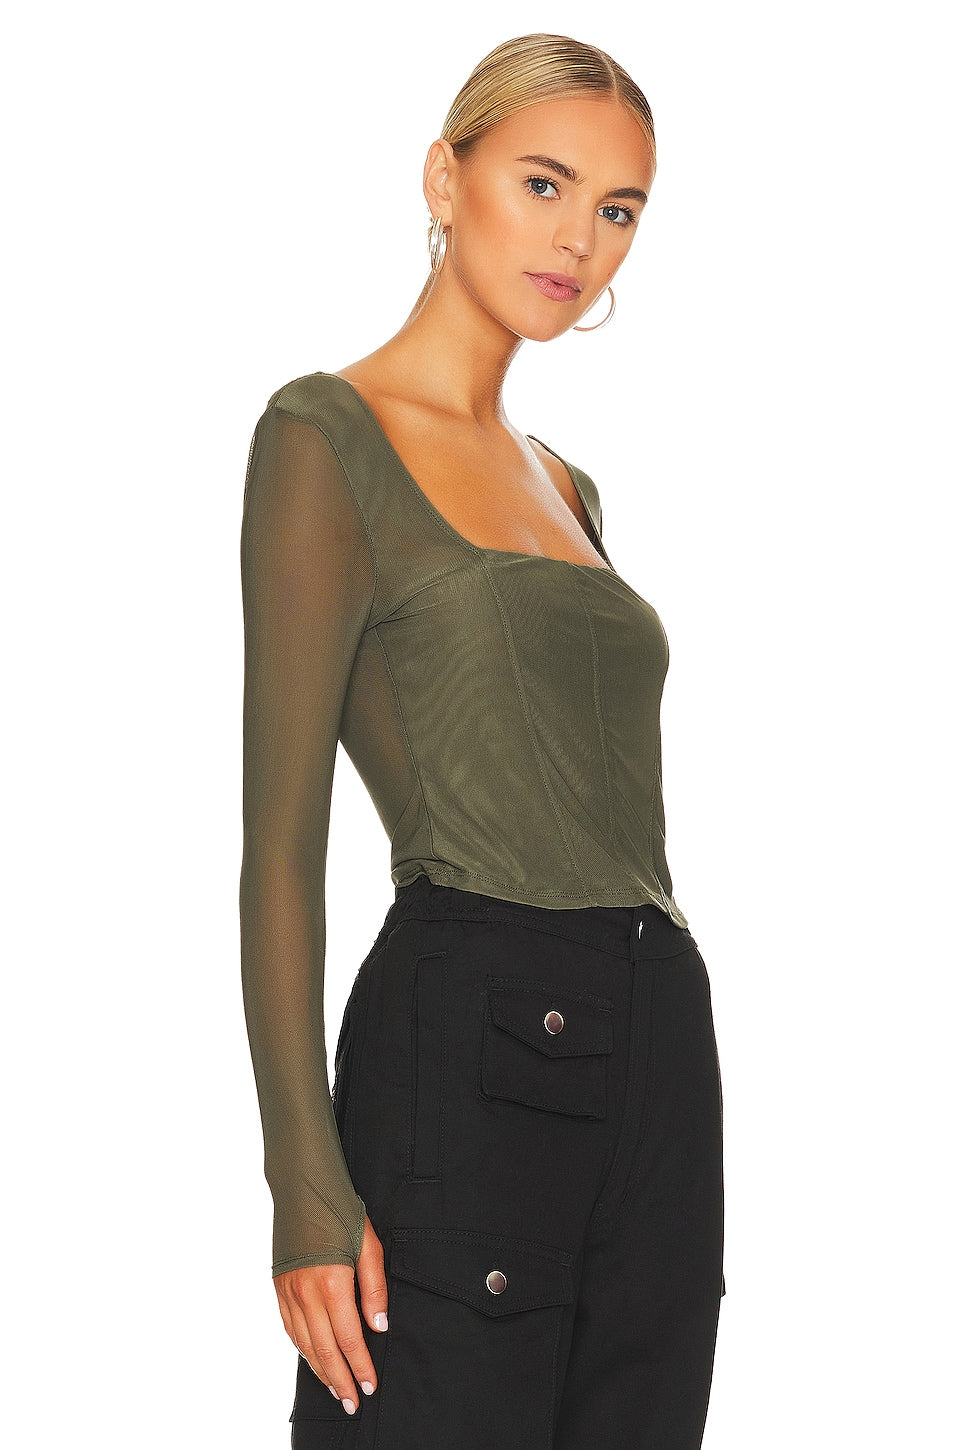 Steve Madden Hayden Top in Olive Night Size Small